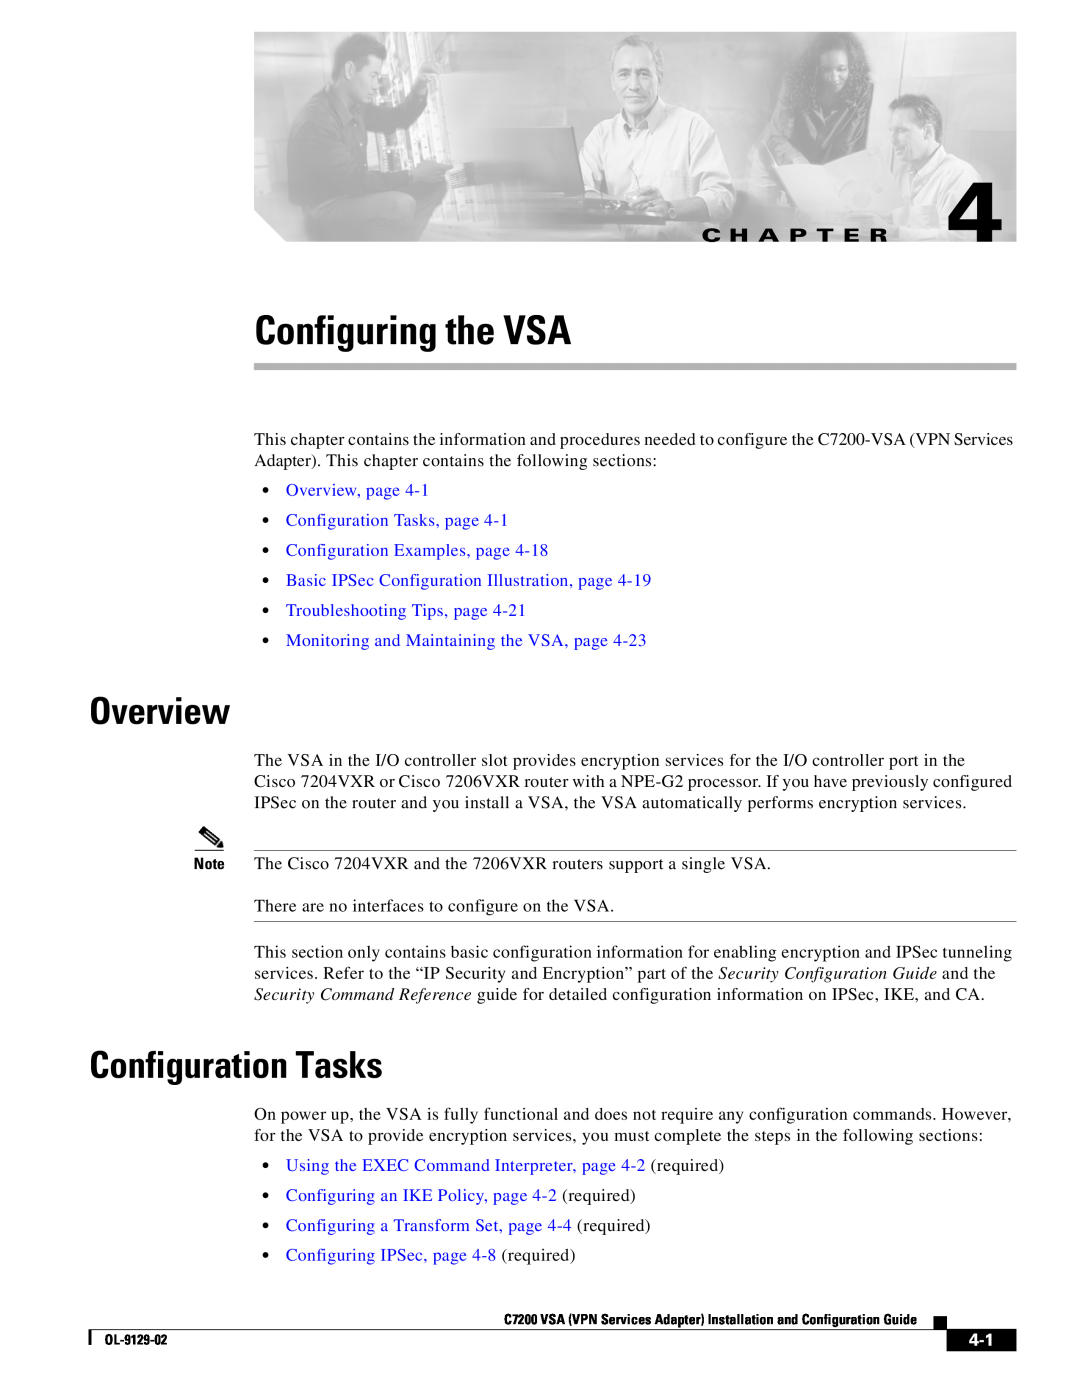 Cisco Systems C7200 manual Configuring the VSA, Overview, Configuration Tasks, Basic IPSec Configuration Illustration, page 